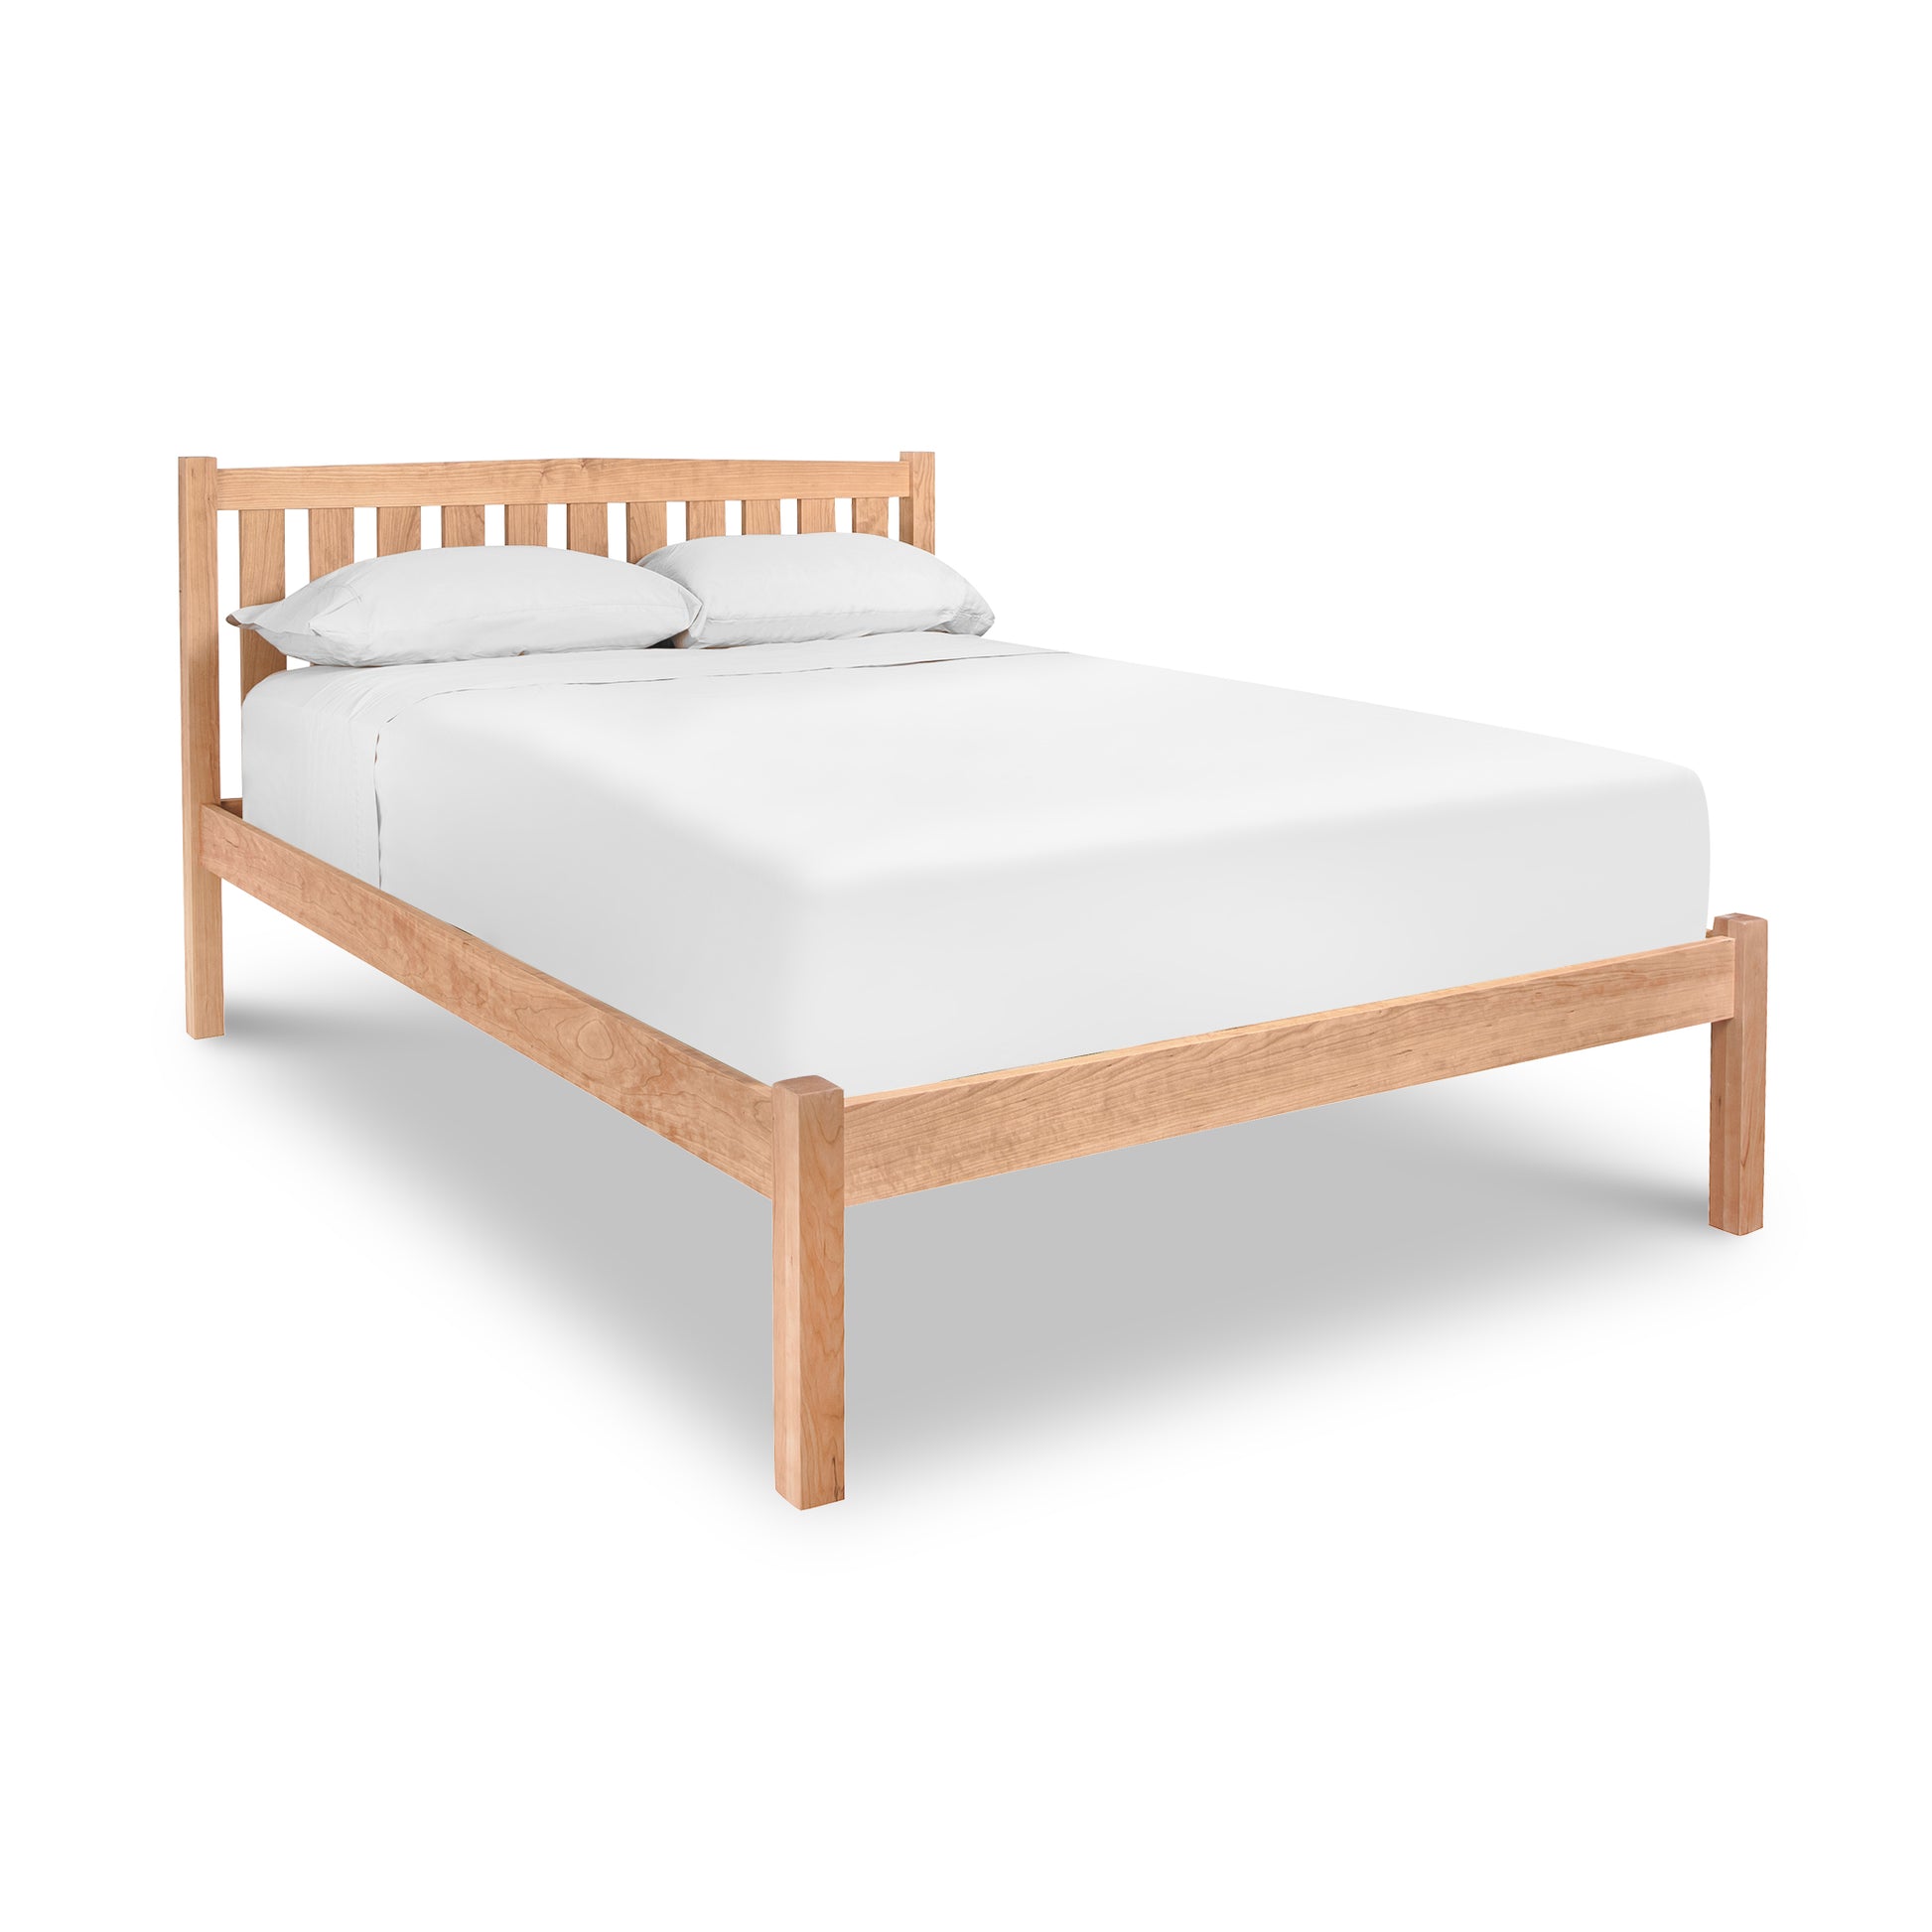 A Bennington Bed with Low Footboard in cherry walnut wood with a white mattress and two pillows against a white background features the Vermont Furniture Designs Bennington Low Footboard.